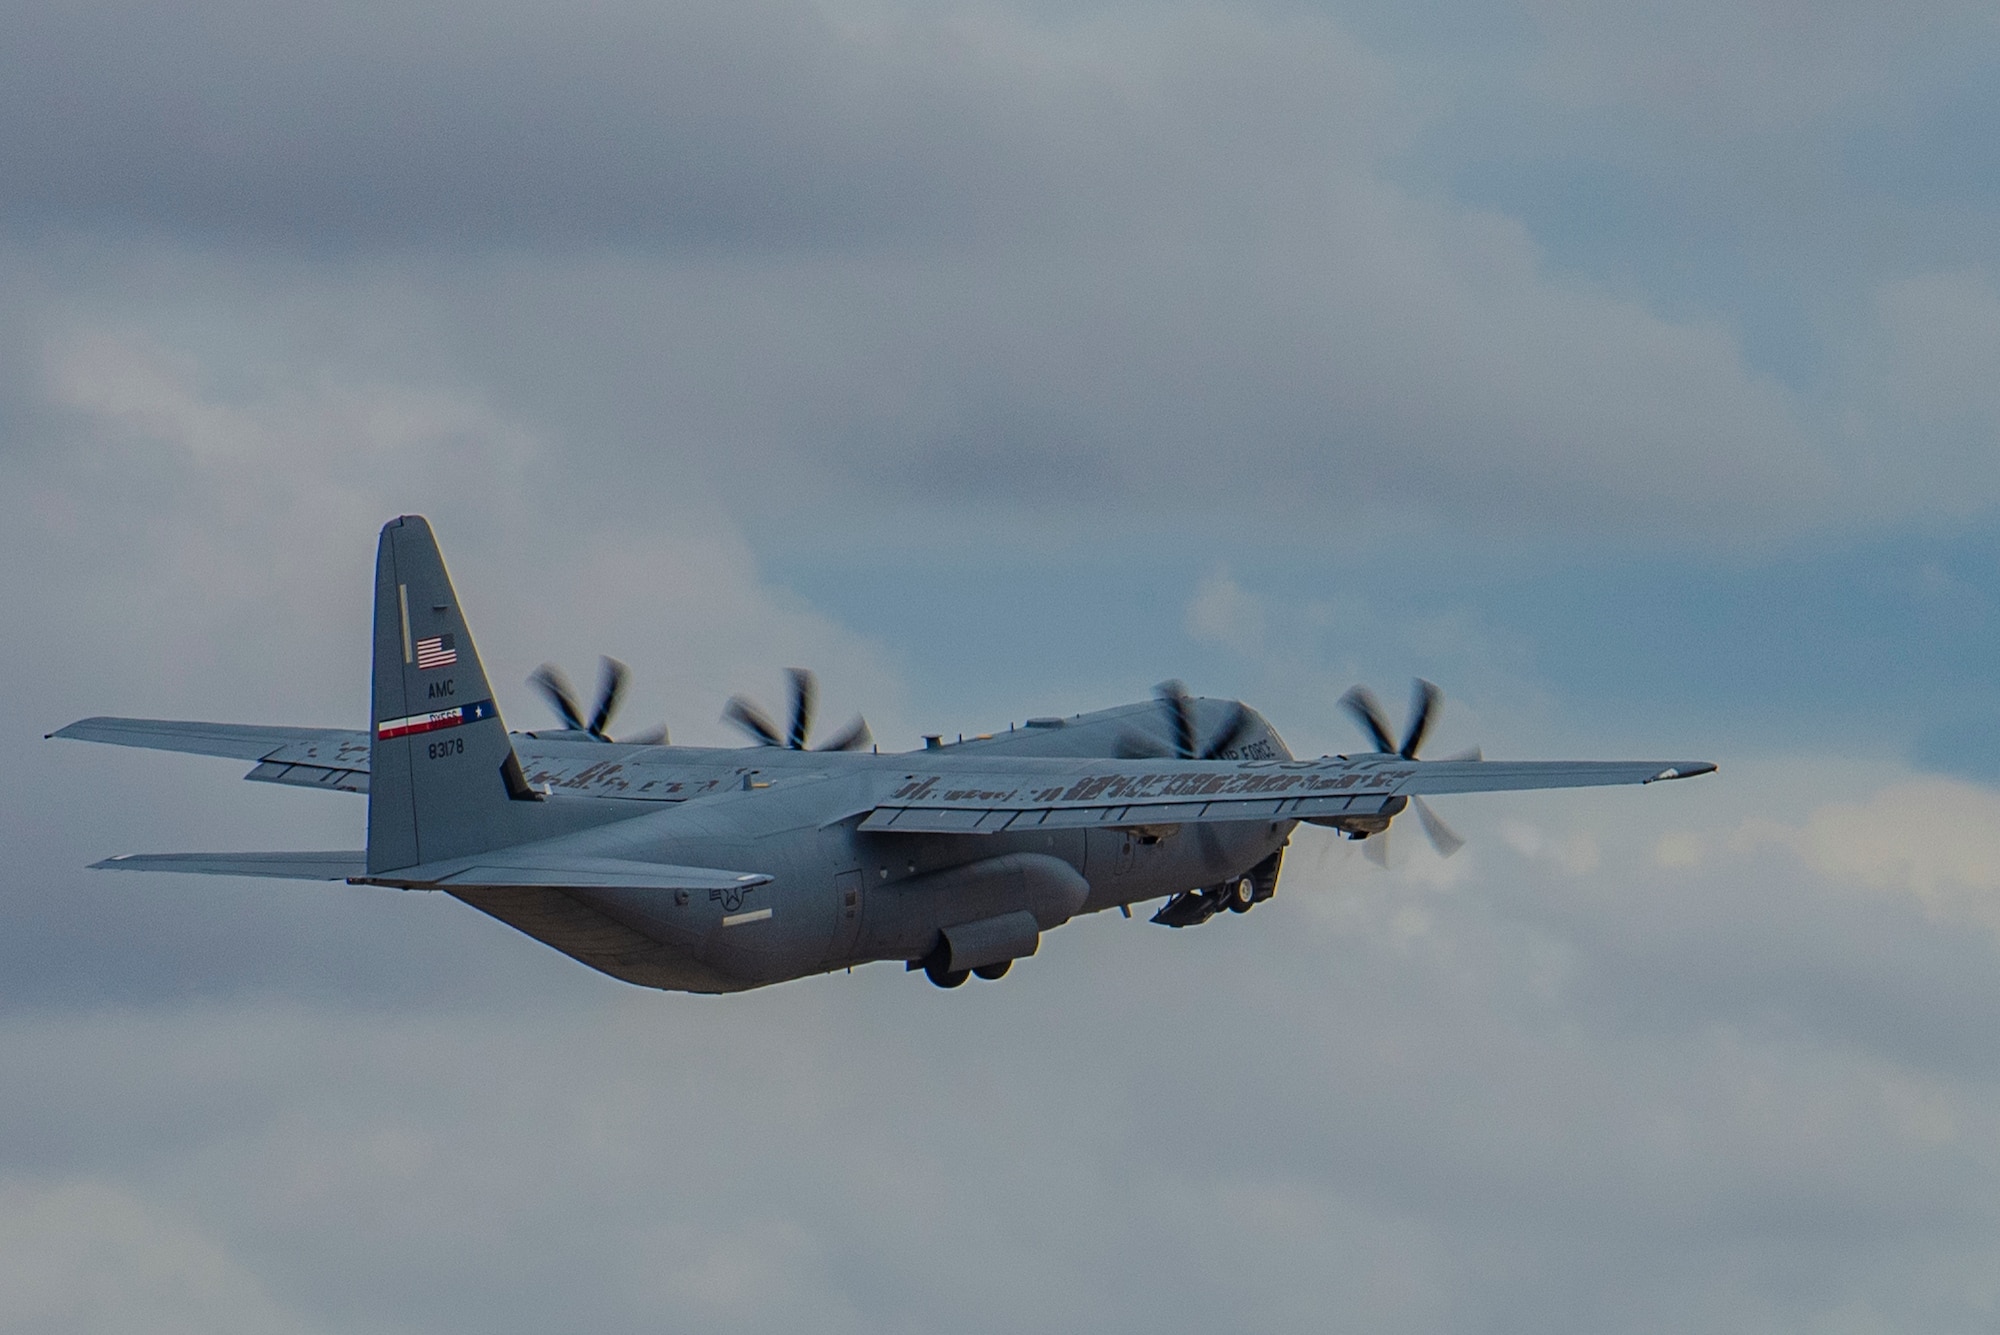 A 317th Airlift Wing C-130J Super Hercules takes off from Dyess Air Force Base, Texas, Aug. 30, 2022. The 317th AW sent four C-130s in support of the ninth exercise of Agile Combat Employment during Patriot Furry. (U.S. Air Force photo by Airman 1st Class Ryan Hayman)